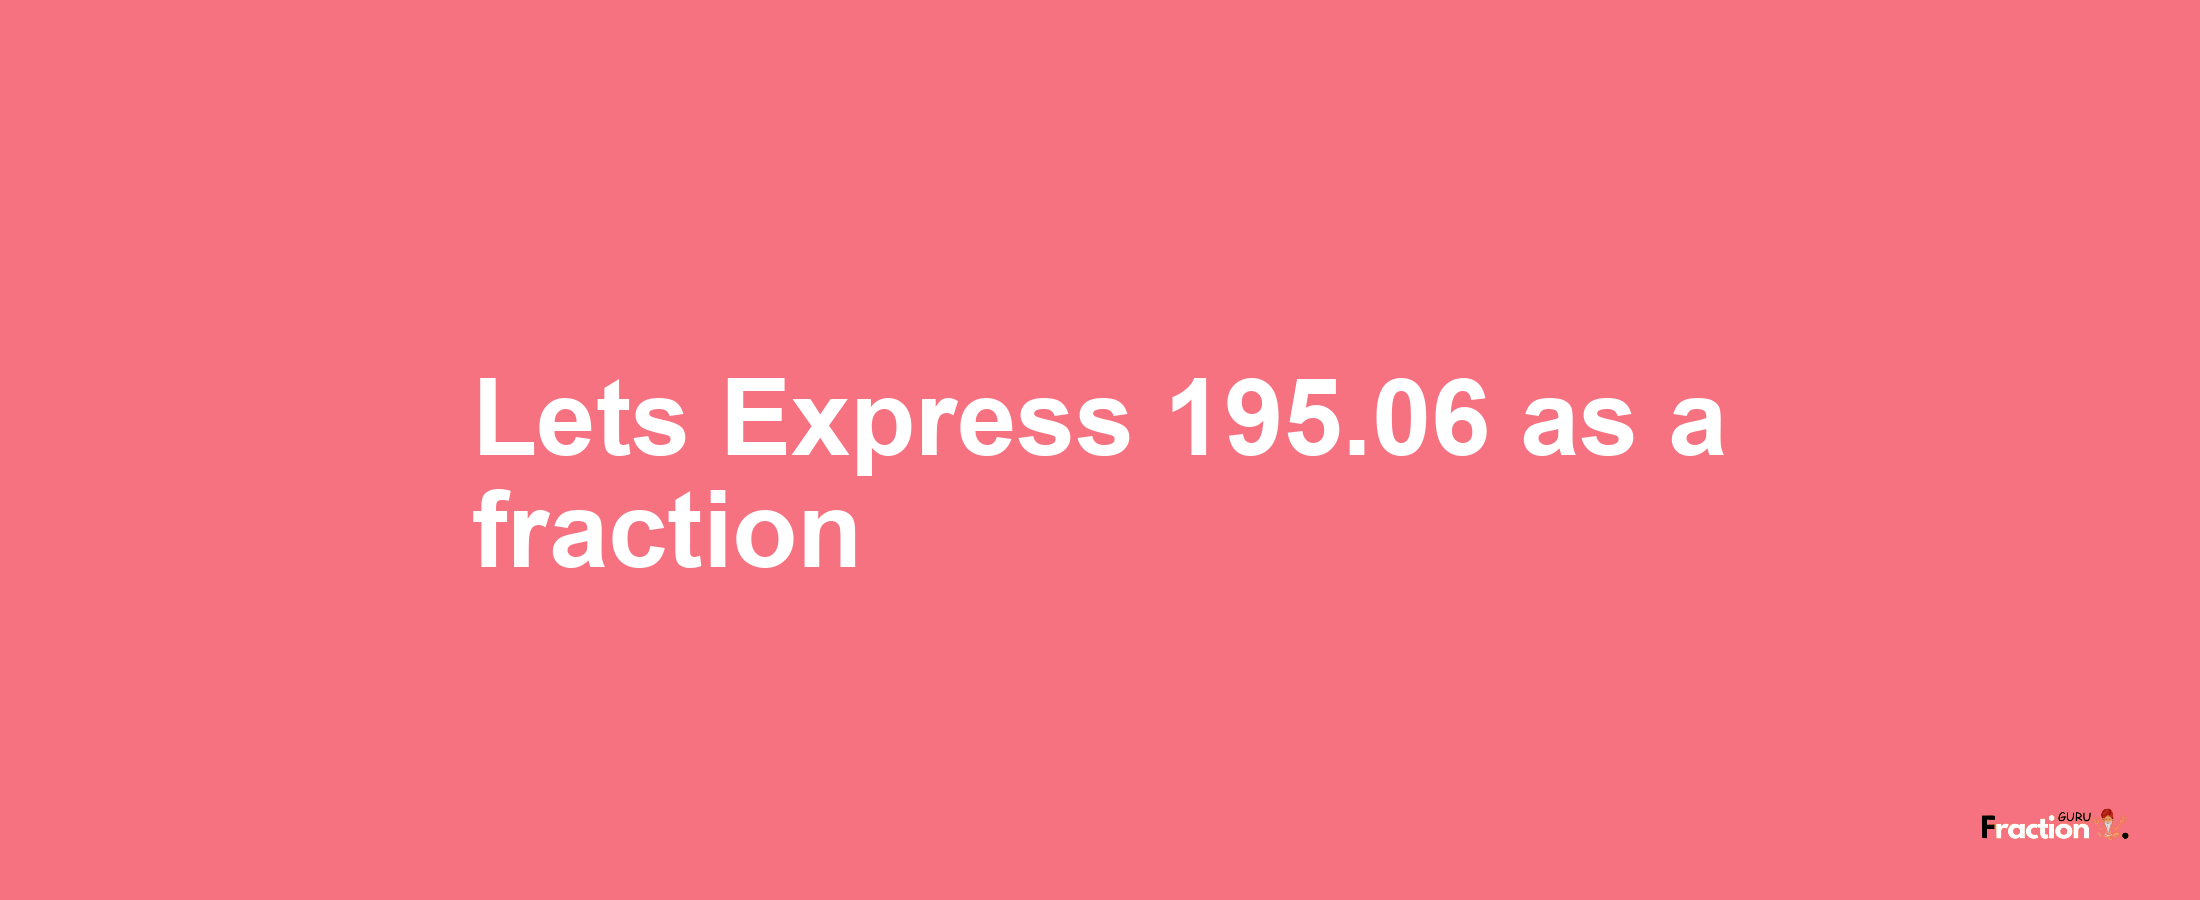 Lets Express 195.06 as afraction